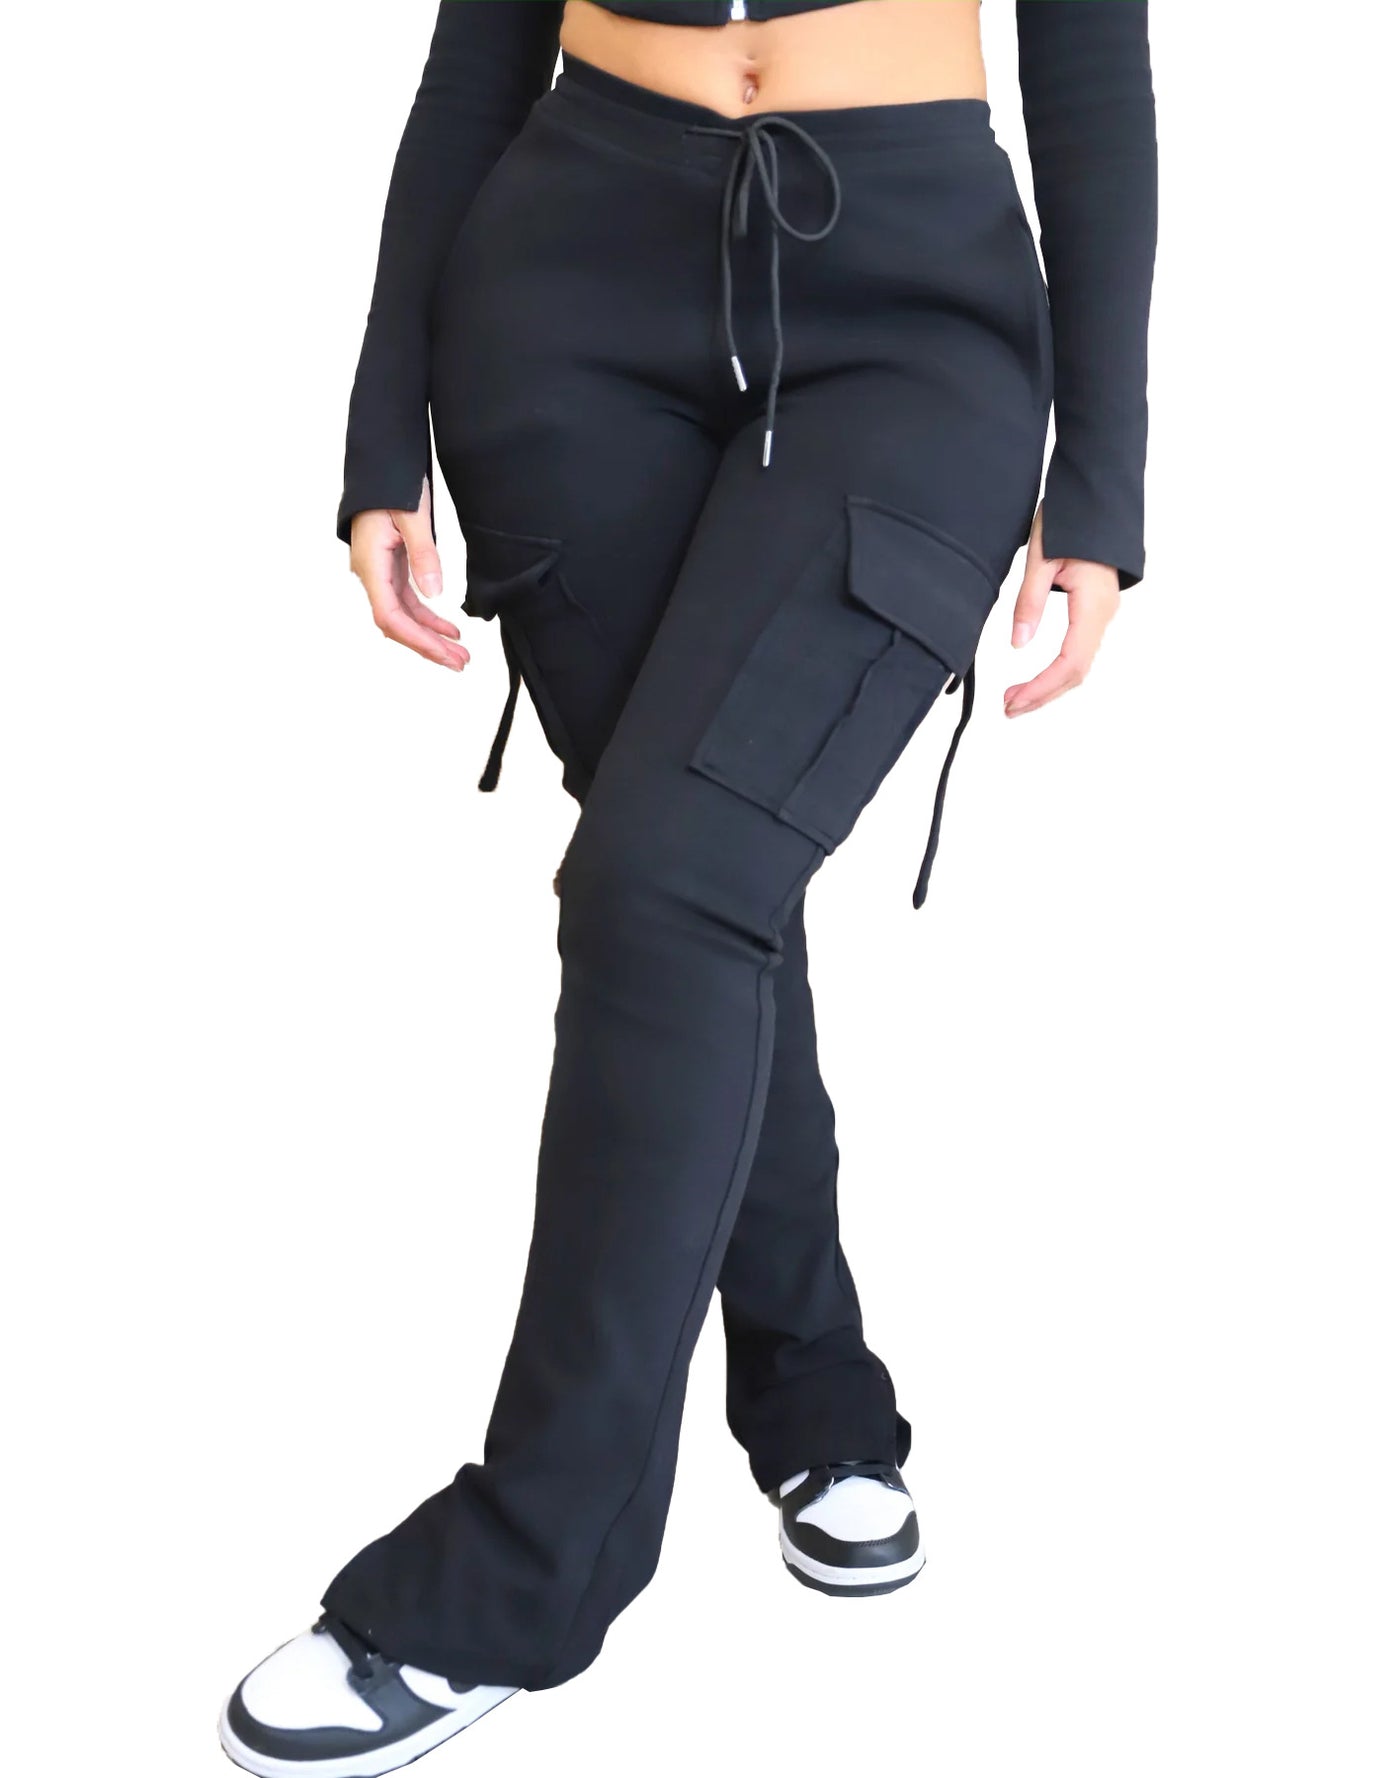 Women's Casual Tight Sportswear Multi-pocket Overalls With Coat And Cap Suit Pants - Carvan Mart